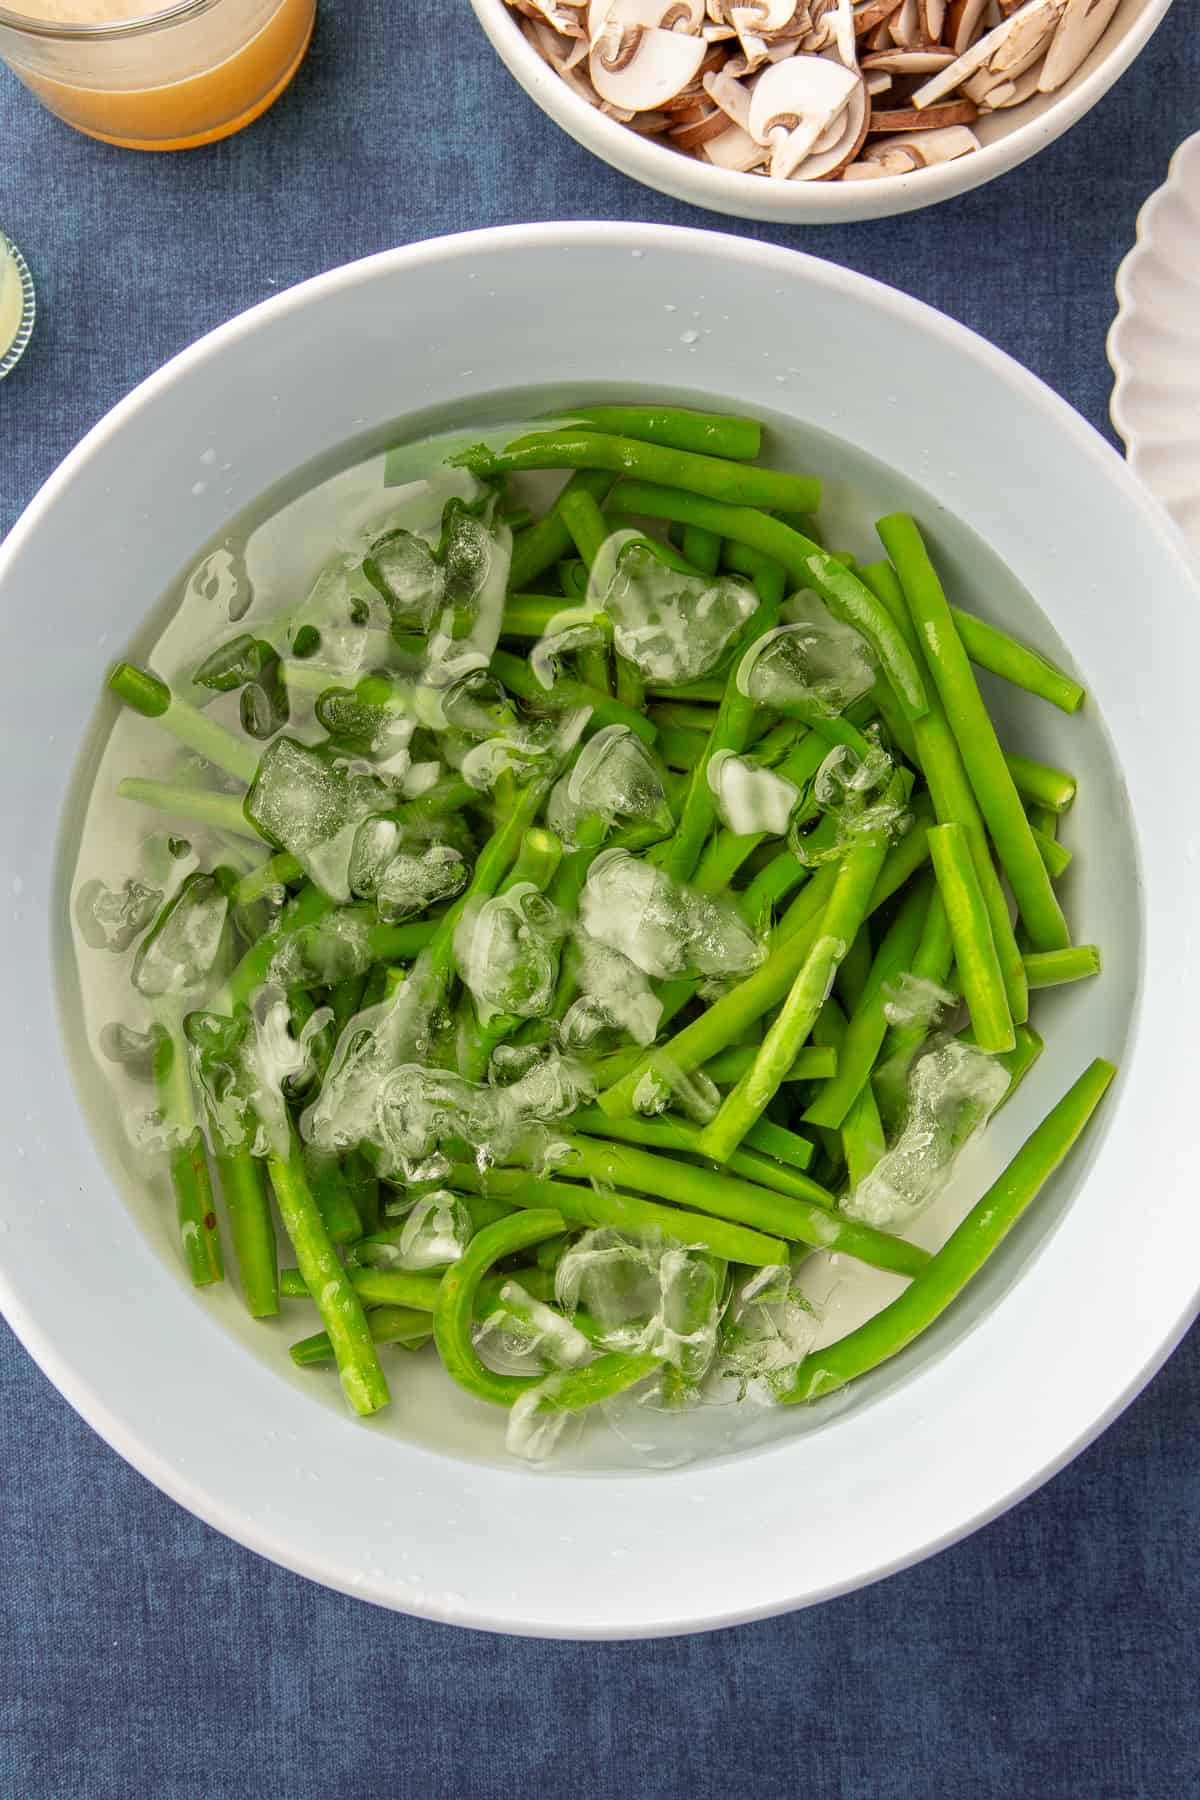 Par-cooked green beans in an ice bath in a large white bowl.